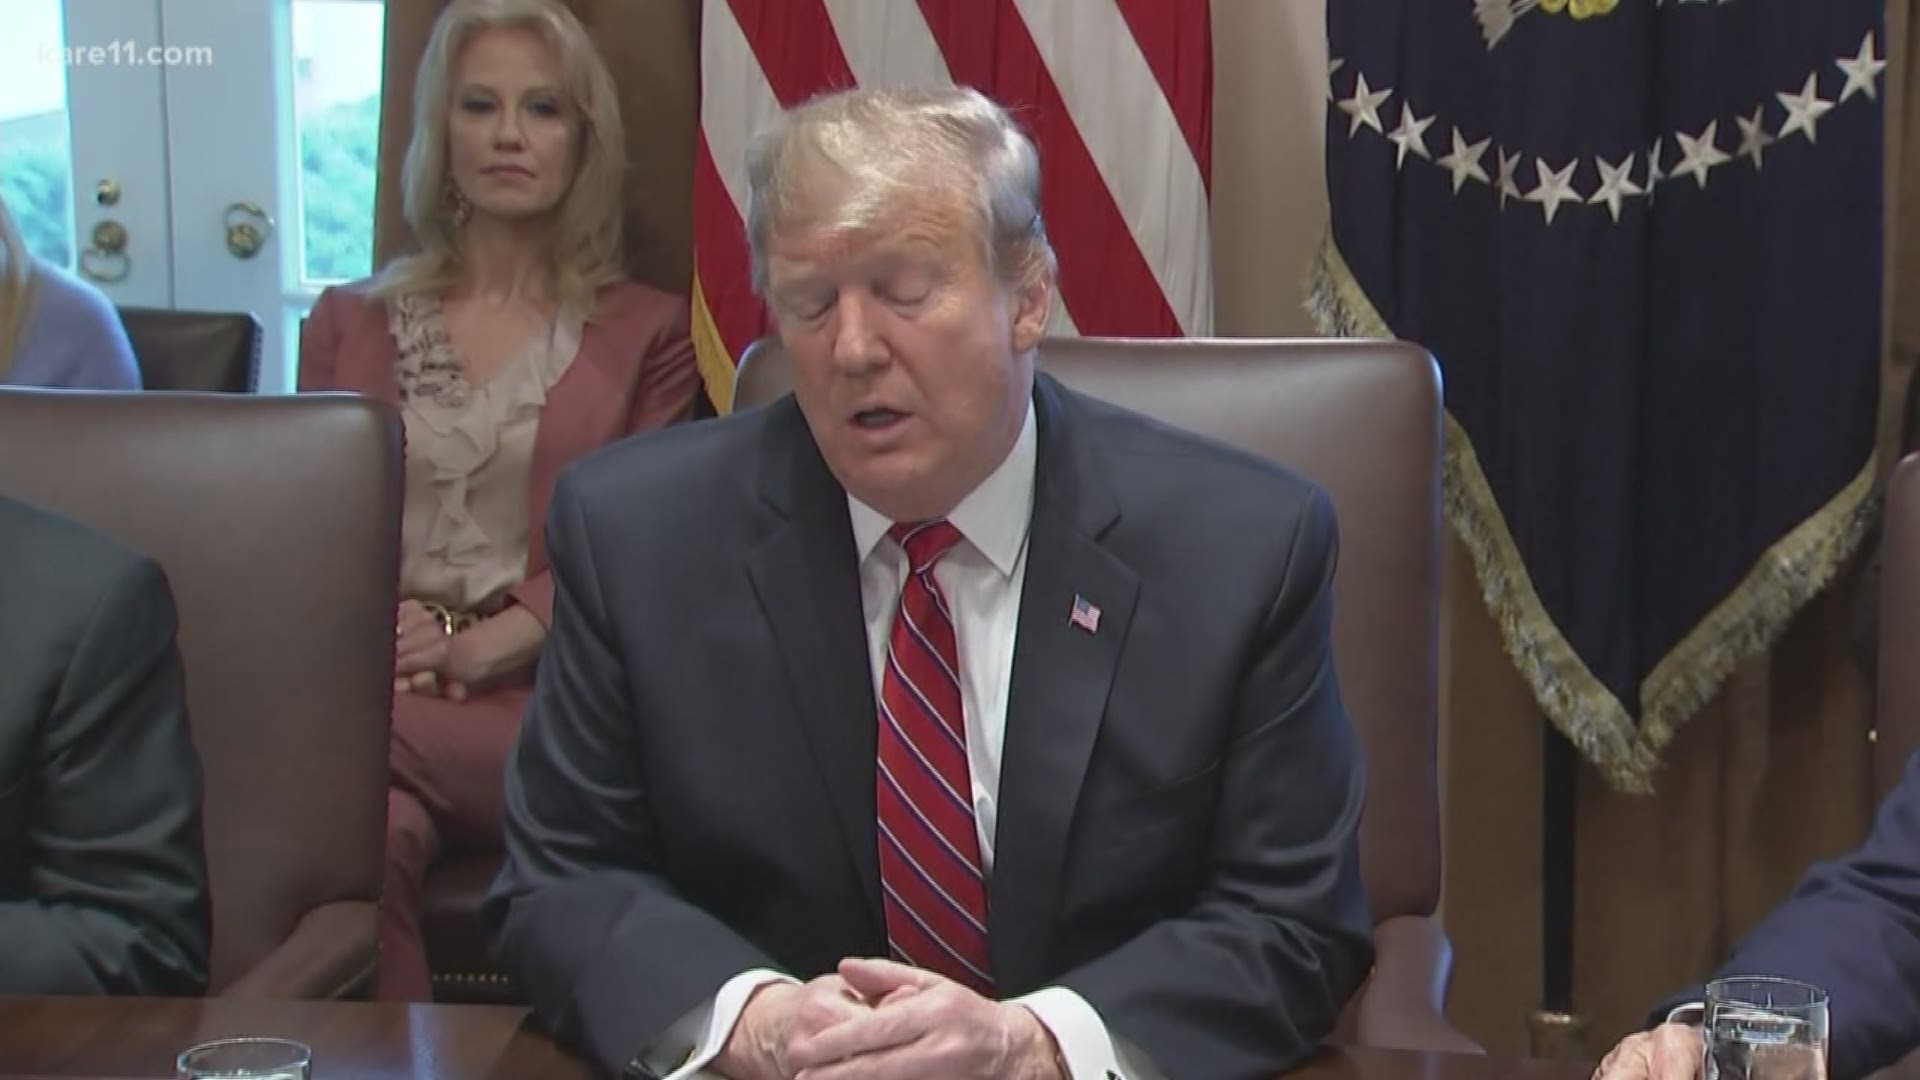 President Donald Trump said Tuesday that freshman Rep. Ilhan Omar's apology for suggesting that members of Congress support Israel because they are being paid to do so was "lame" and that she should resign. https://kare11.tv/2N4Bf3I